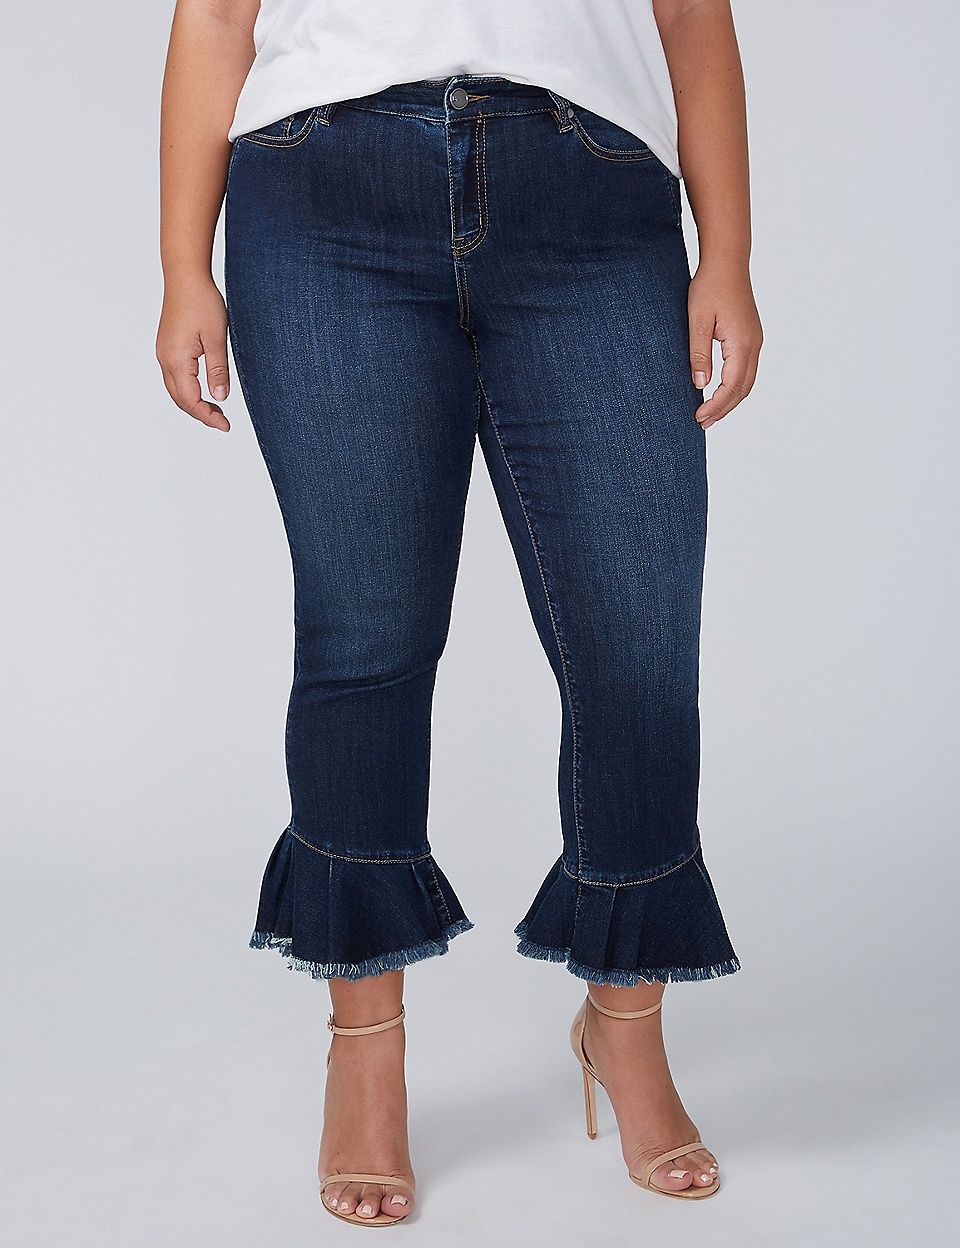 these plus-size jeans have already sold out twice